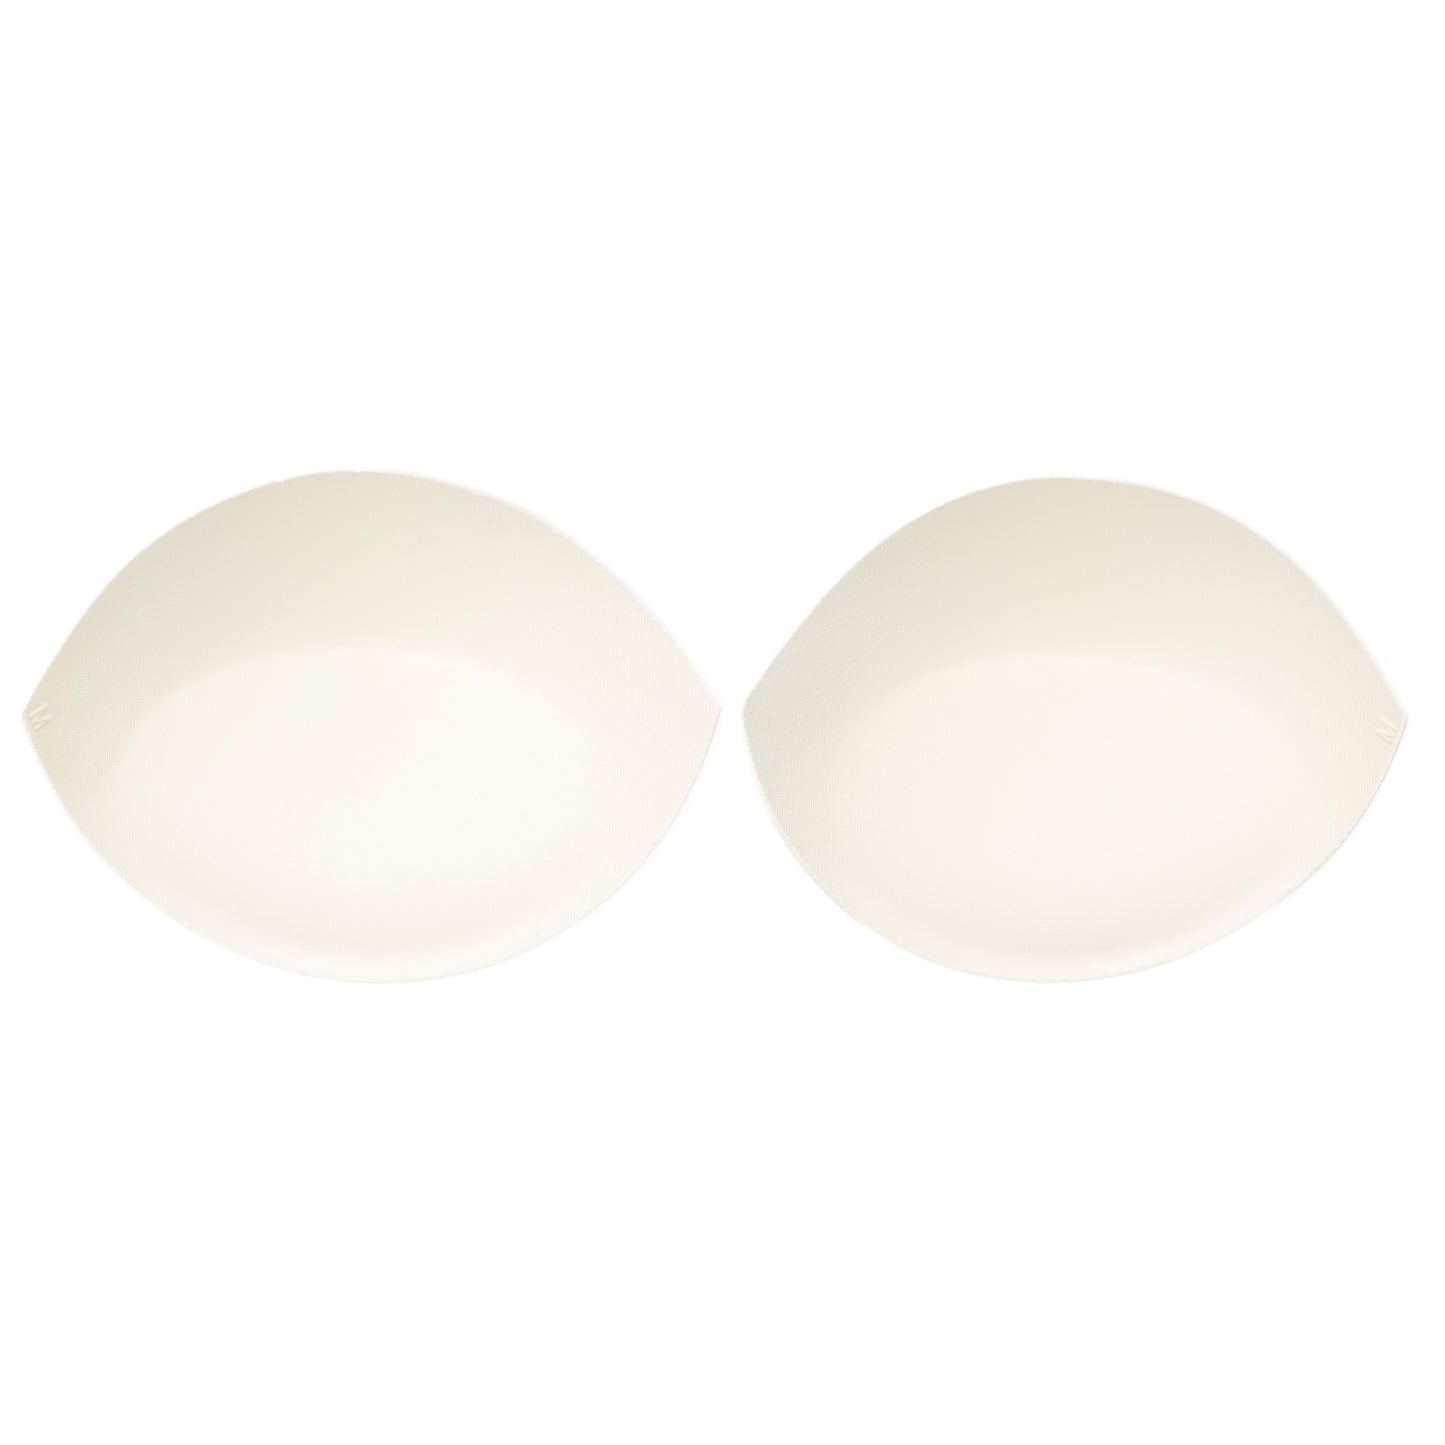 FIRM SOFT-TOUCH PUSH UP BRA CUP LIGHT IVORY